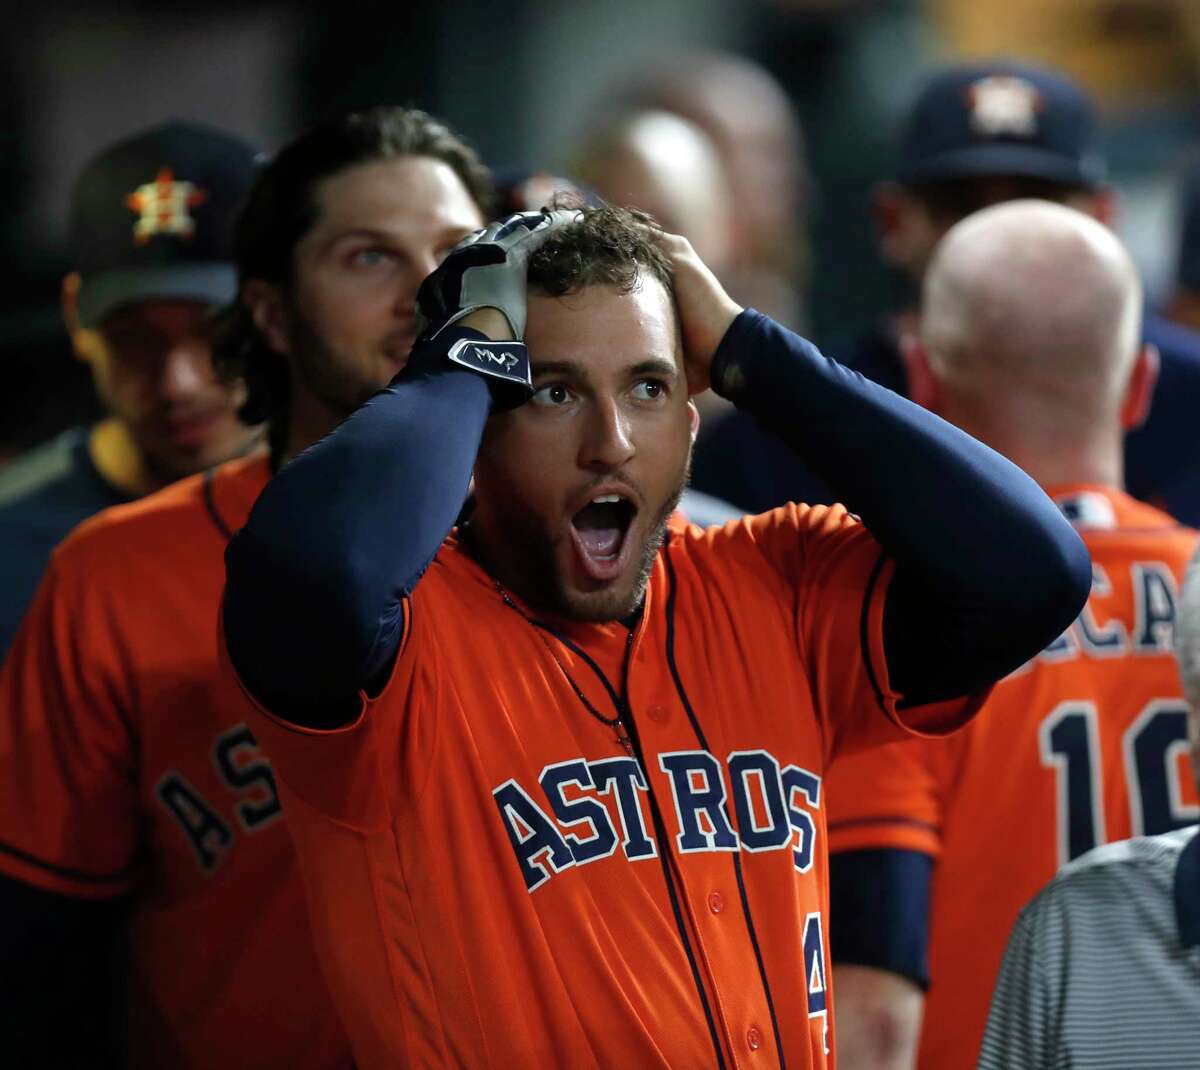 MLB Network's Peter Gammons is a proponent of Astros outfielder George Springer's candidacy for American League MVP.